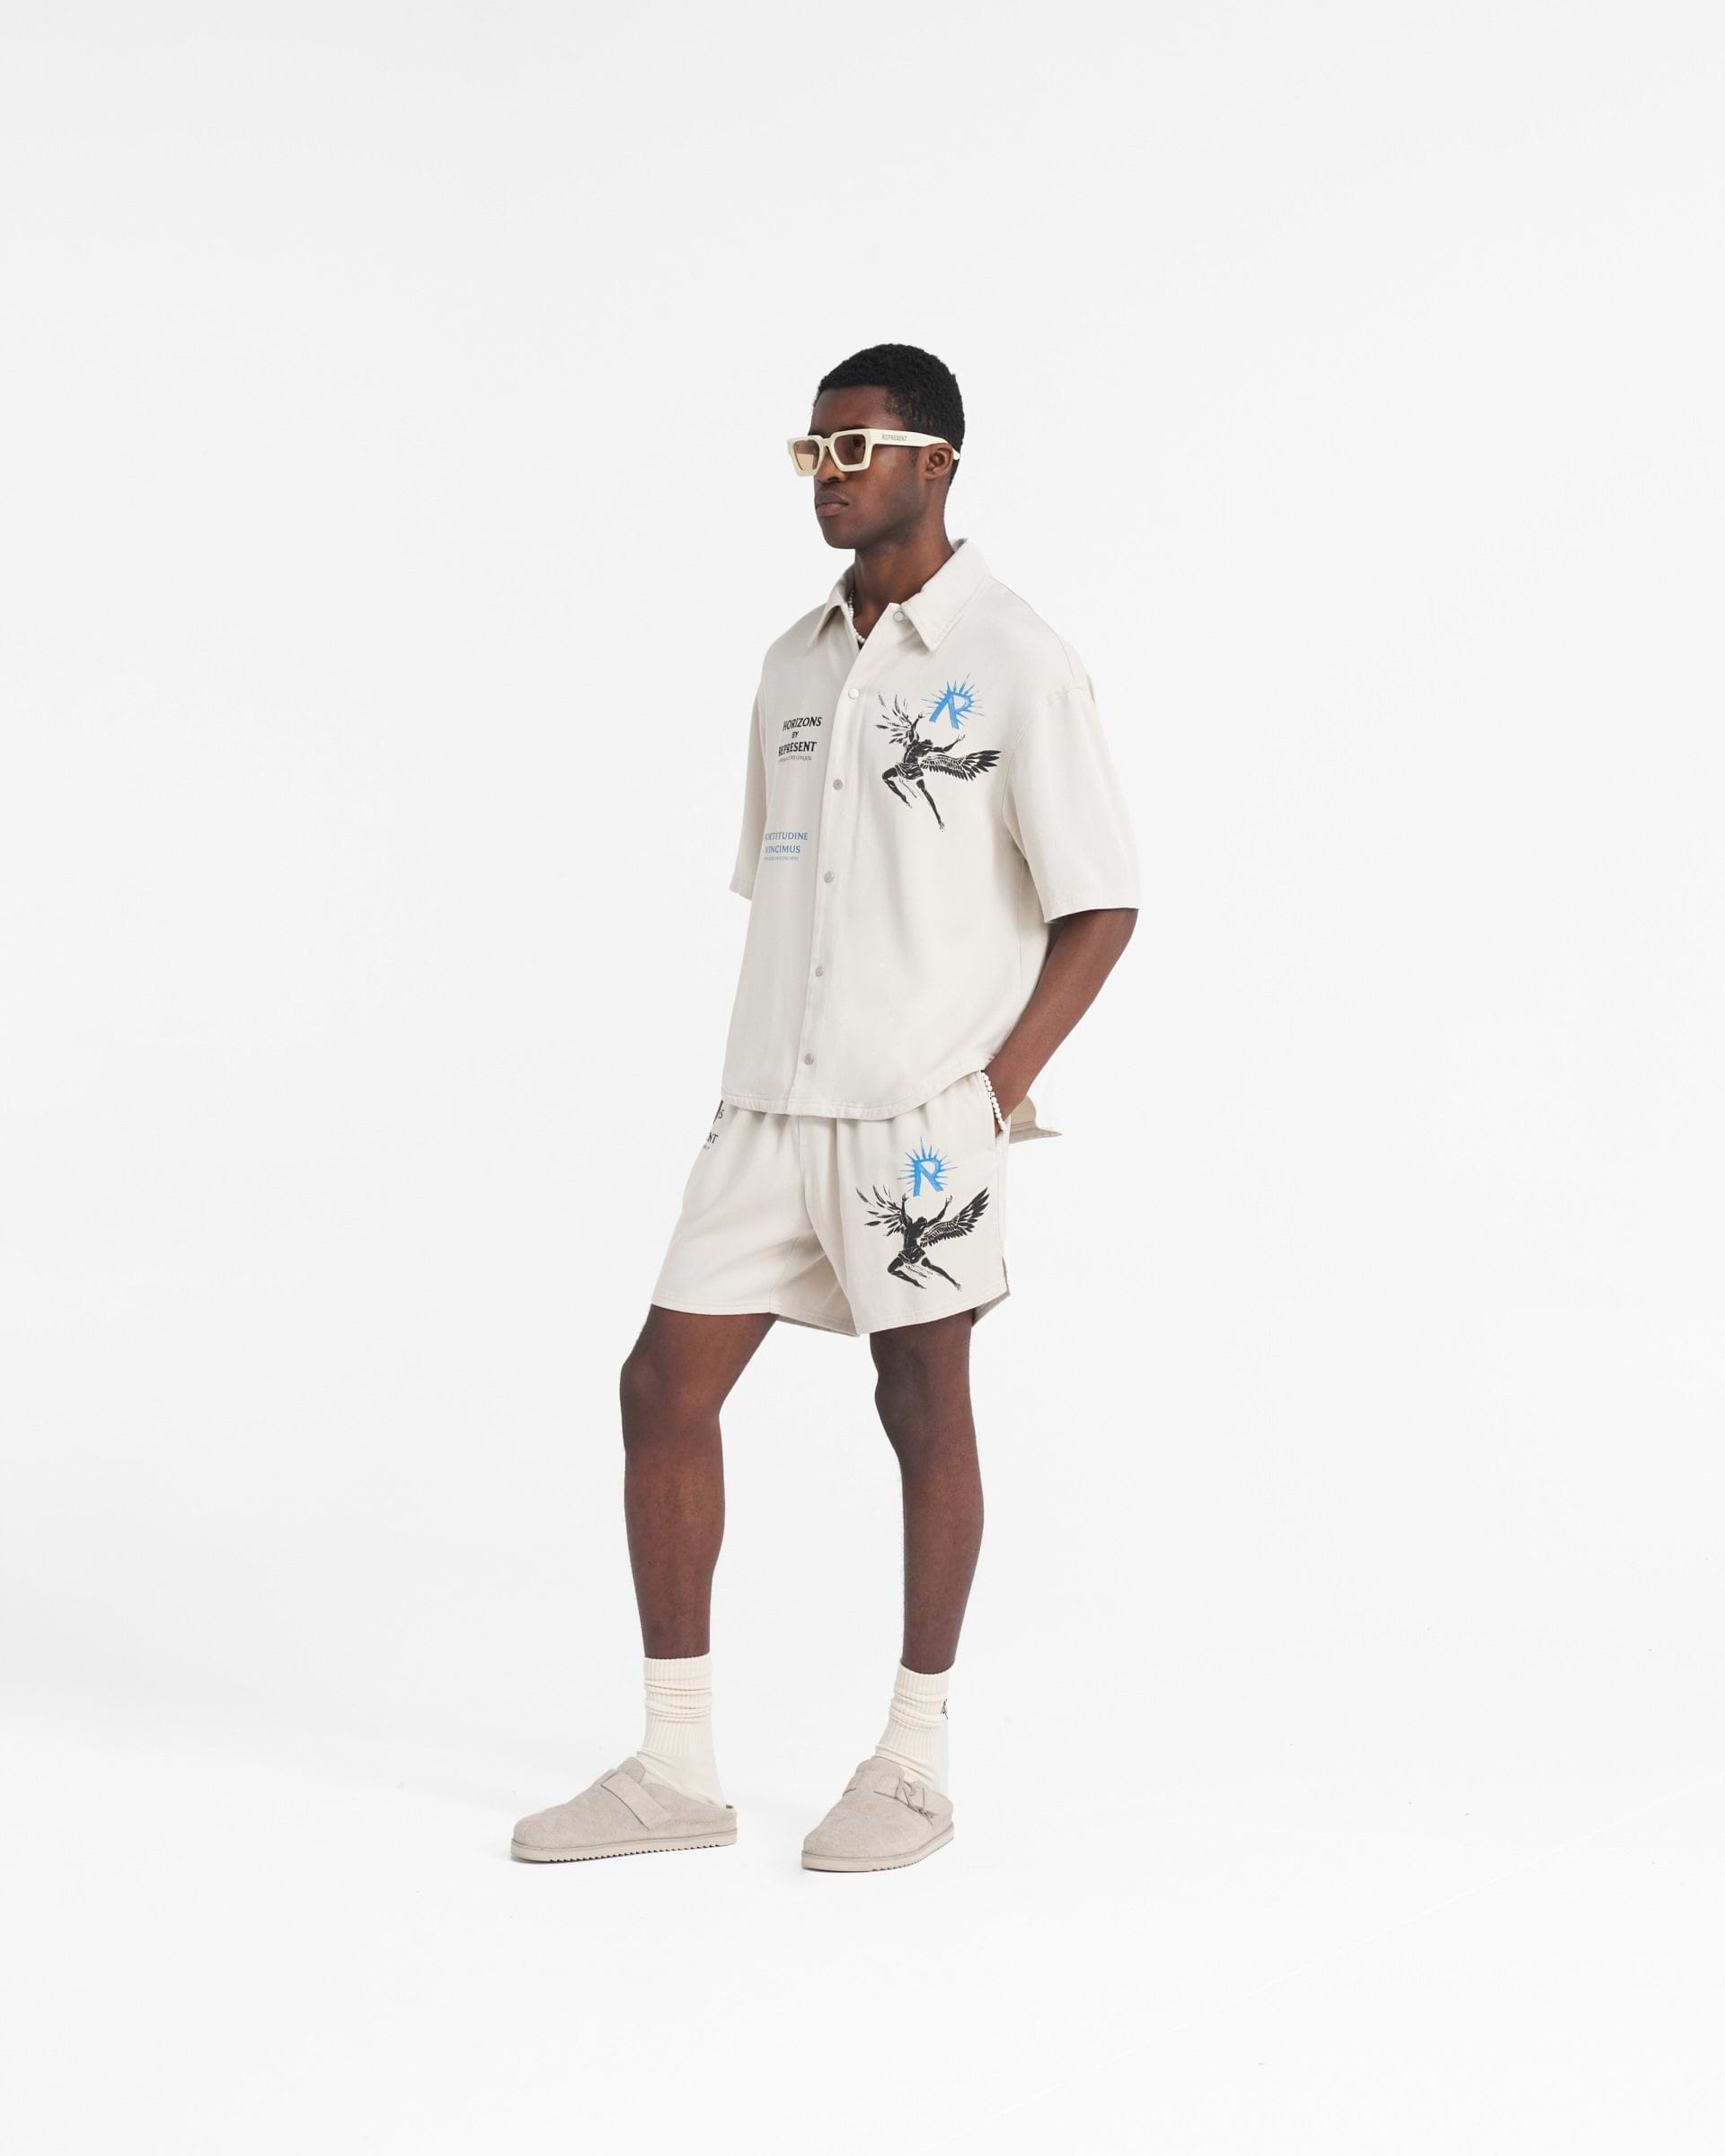 Icarus Short - Off White